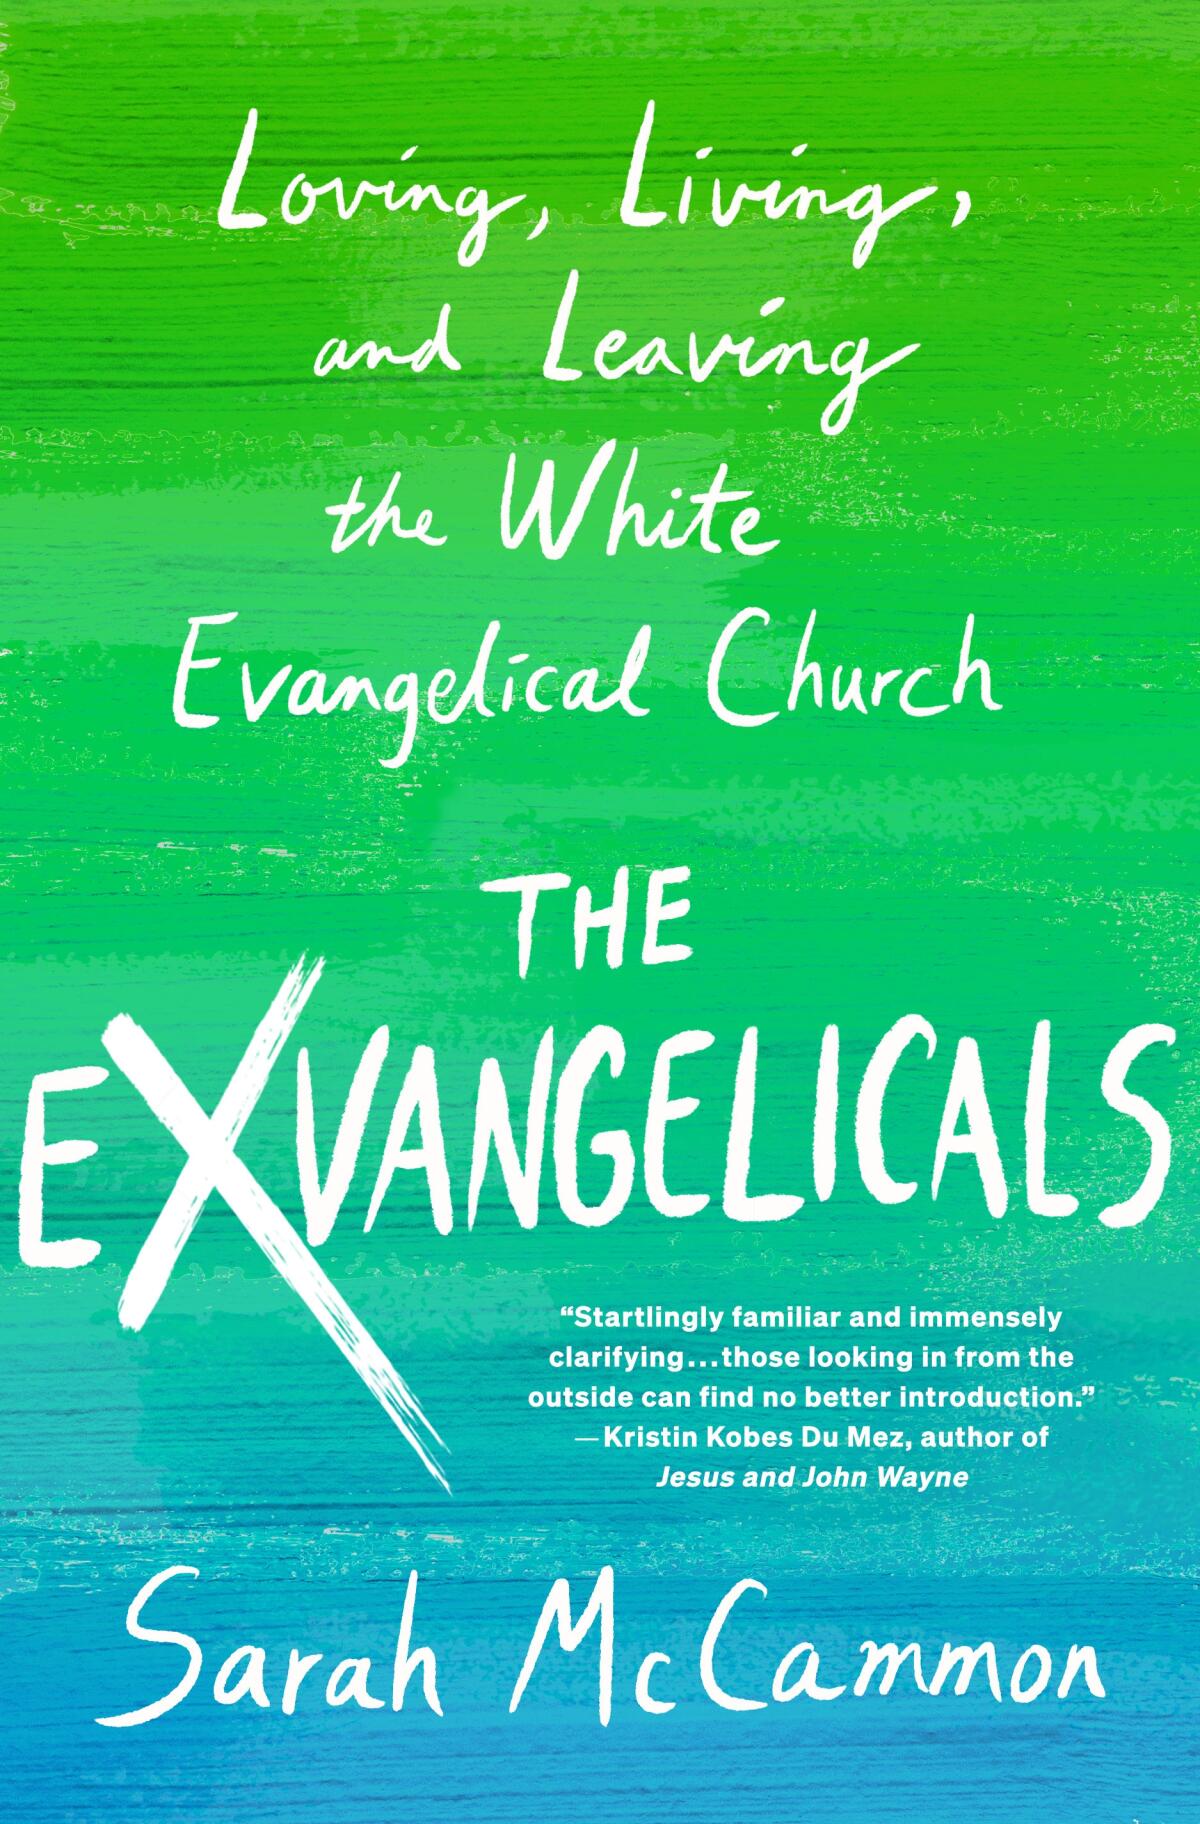 The green-shading-to-blue cover of the book "The Exvangelicals" by Sarah McCammon